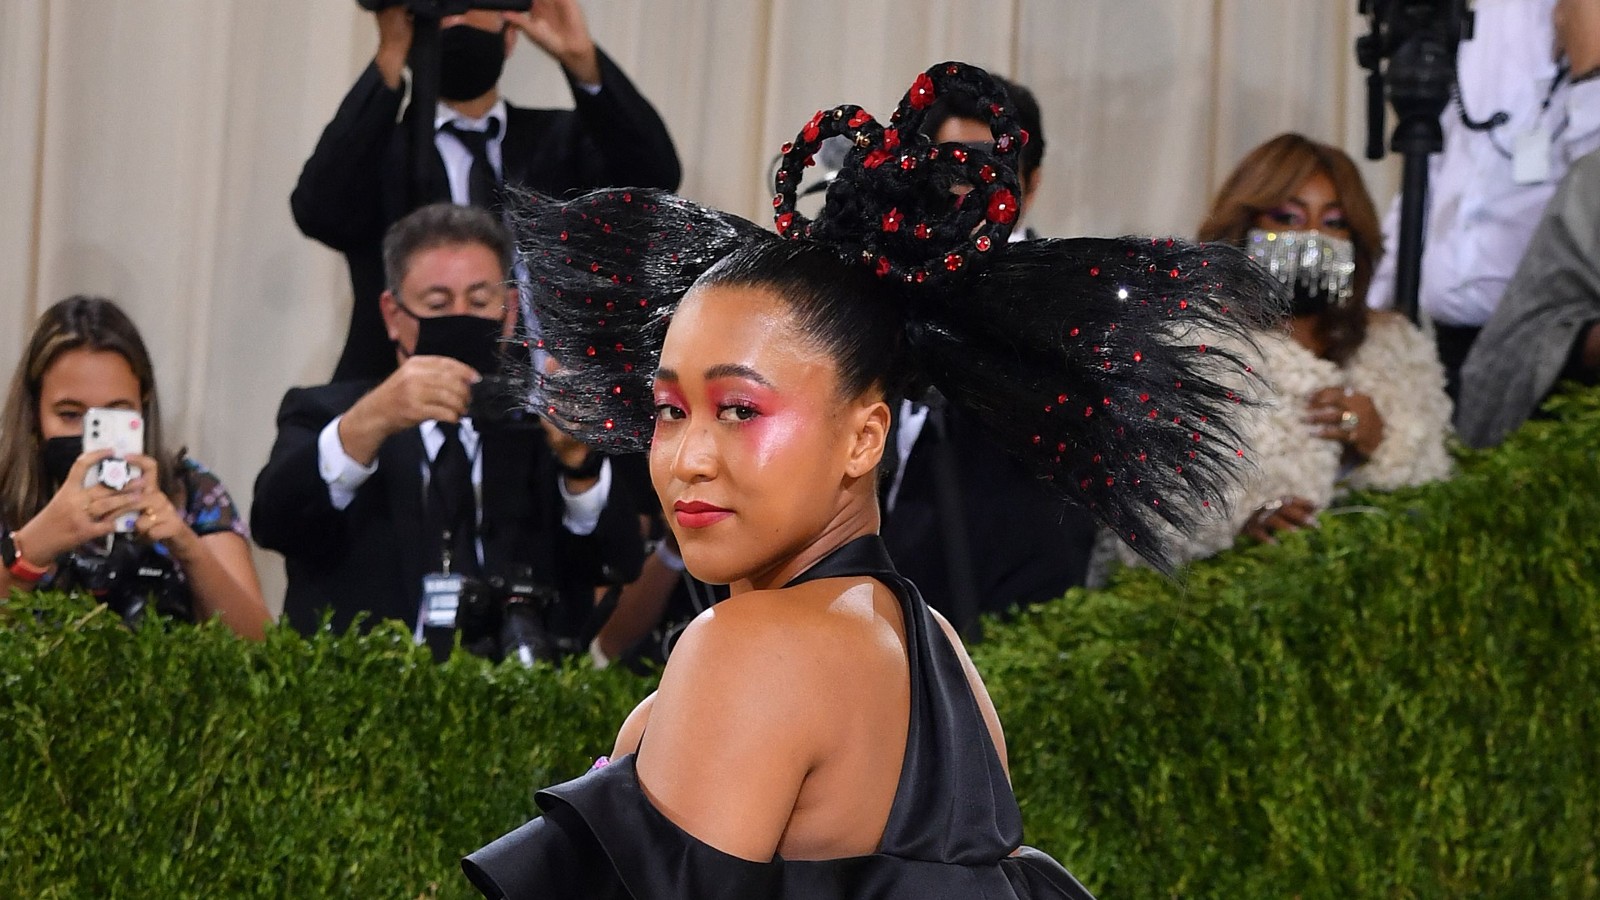 Met Gala 2021: The Date, Guest List, Fashion Theme, and How To Watch